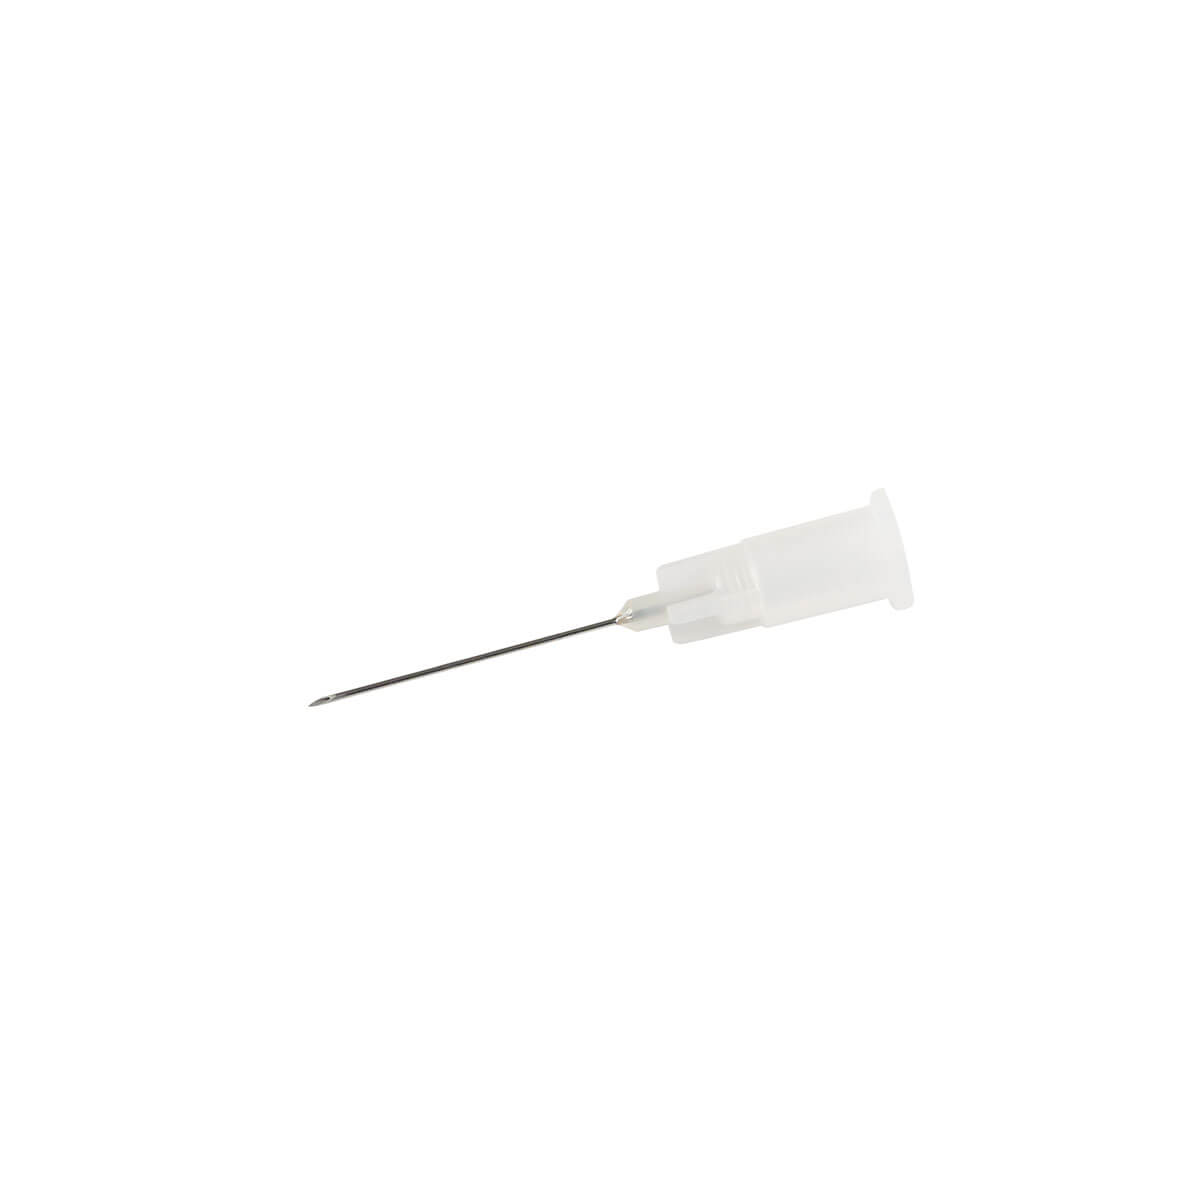 Sterican Needle Grey 27G 20MM